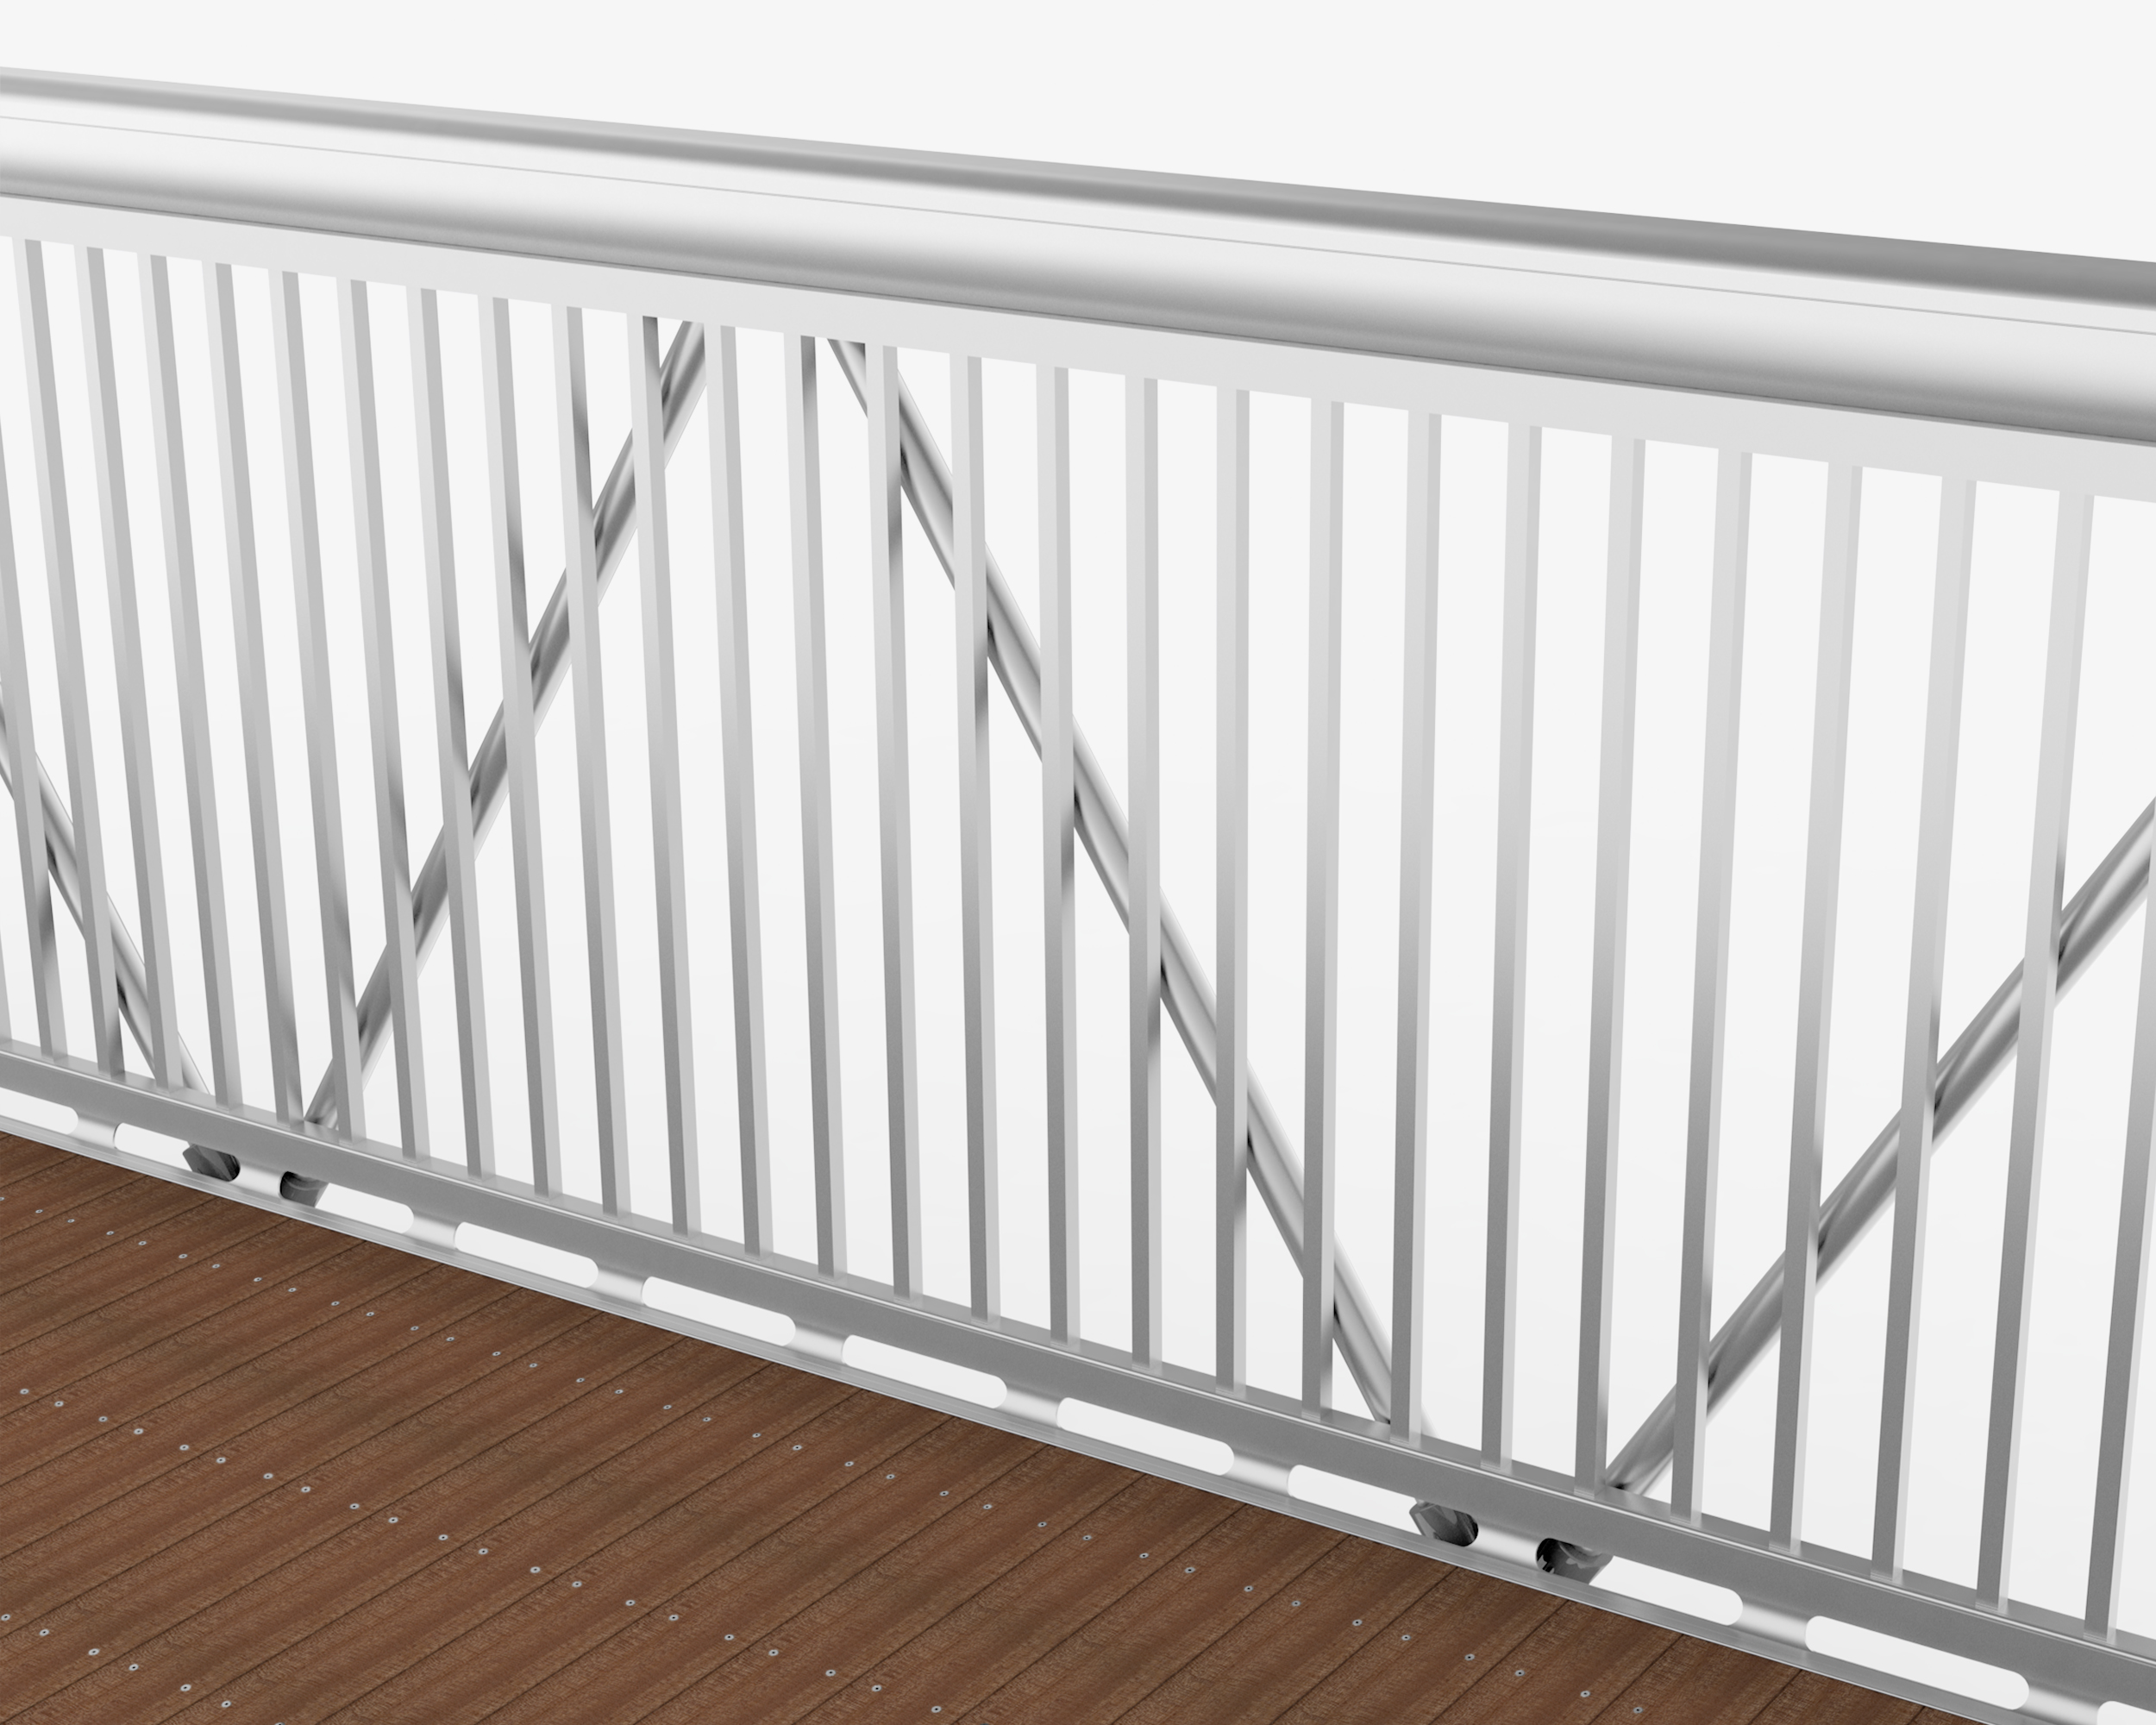 Guardrail with vertical pickets on weld-free aluminum bridge